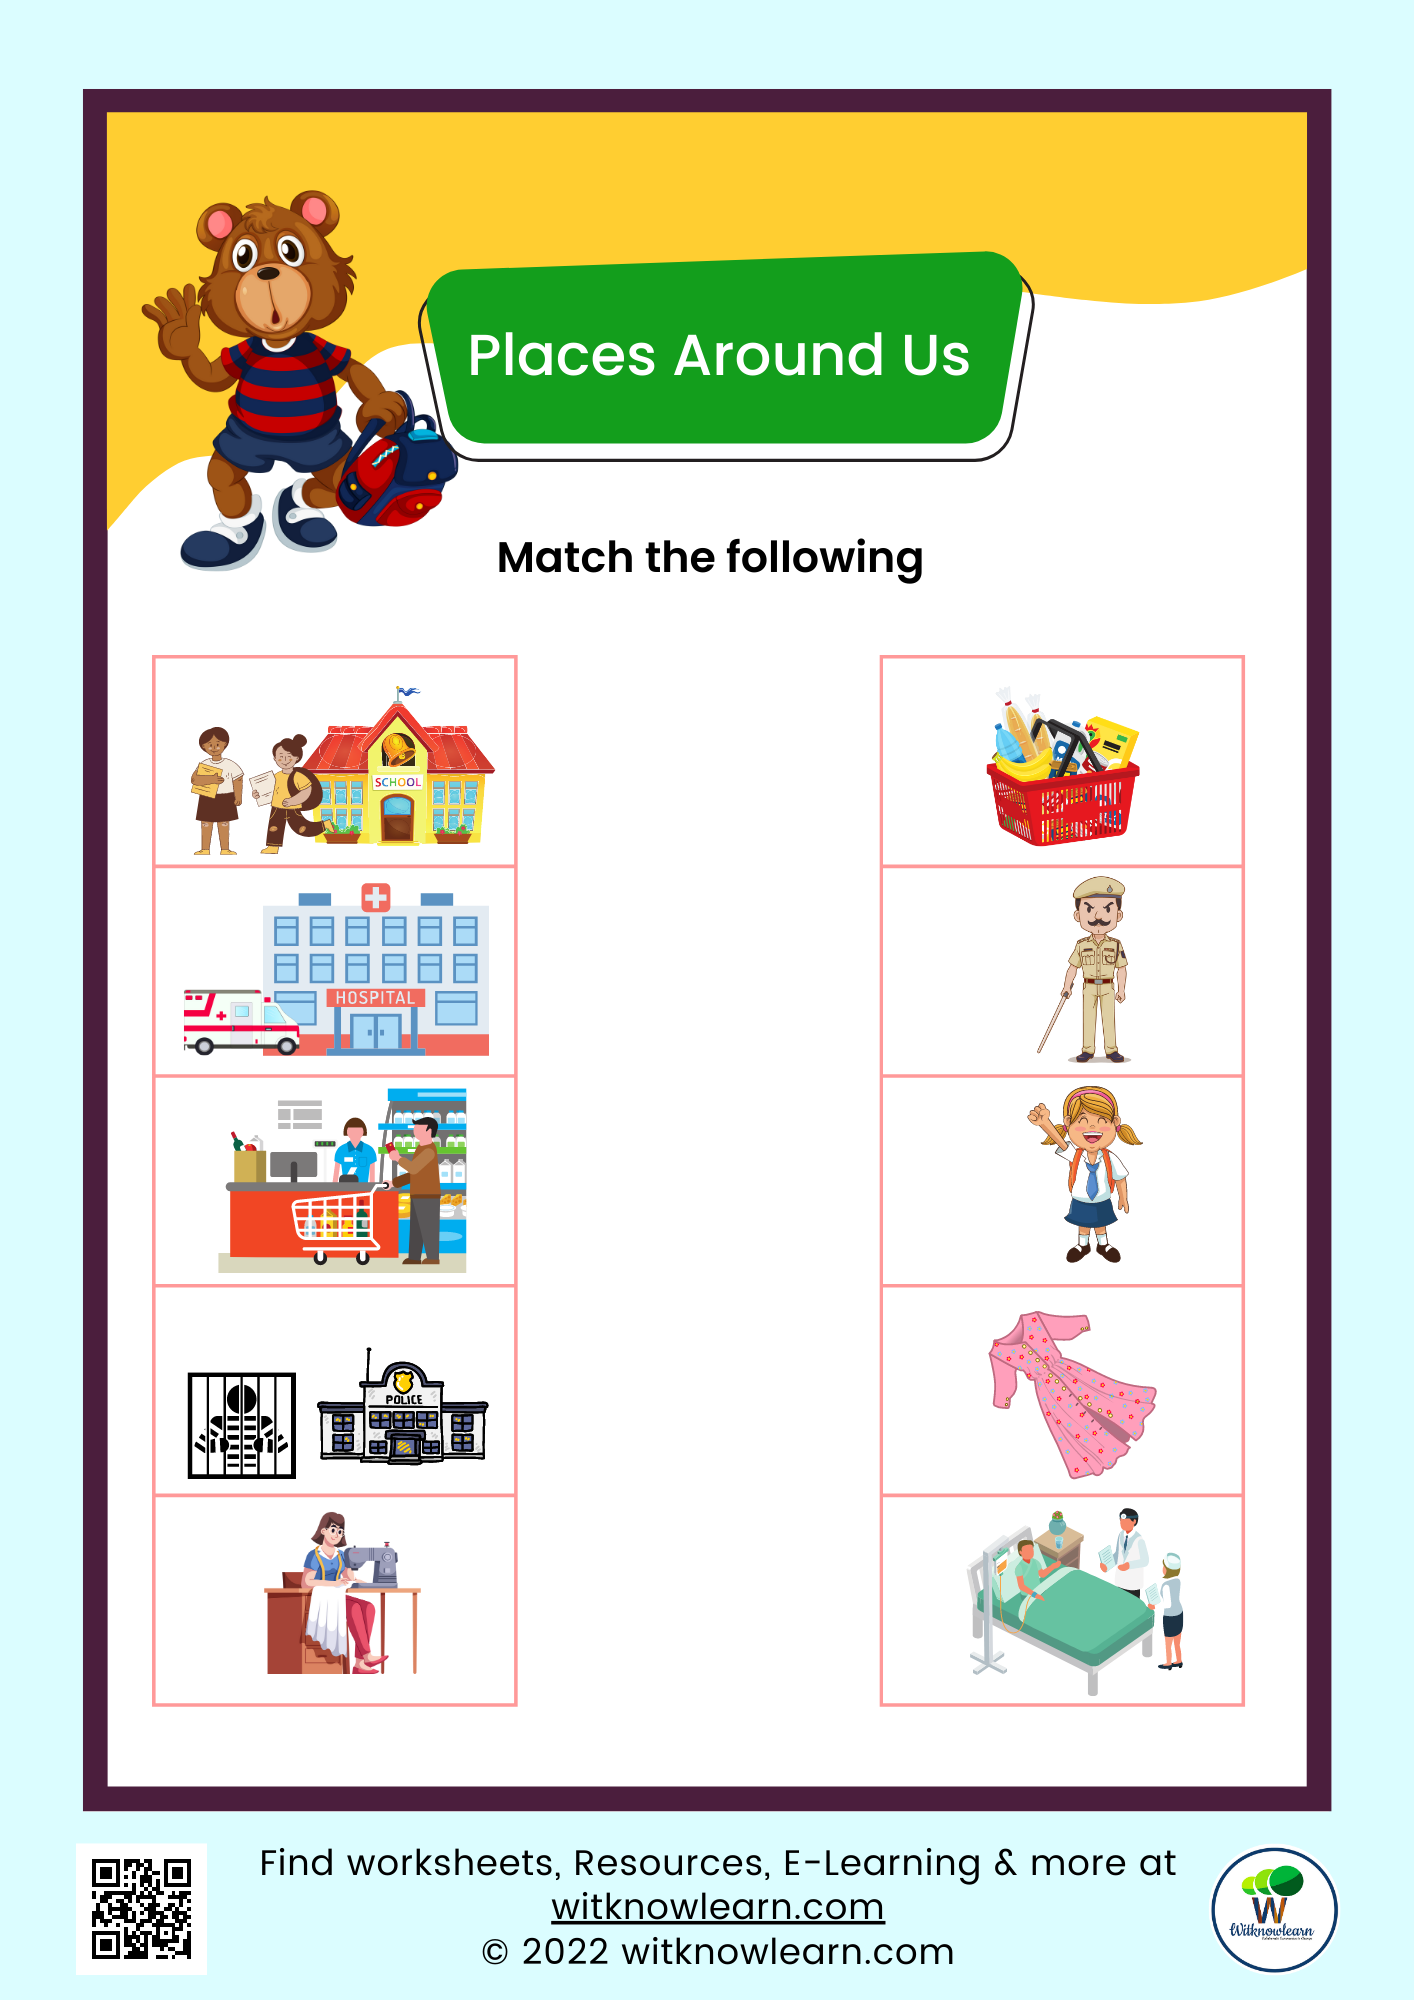 Worksheet on Places Around Us For Nursery class – Download Now!